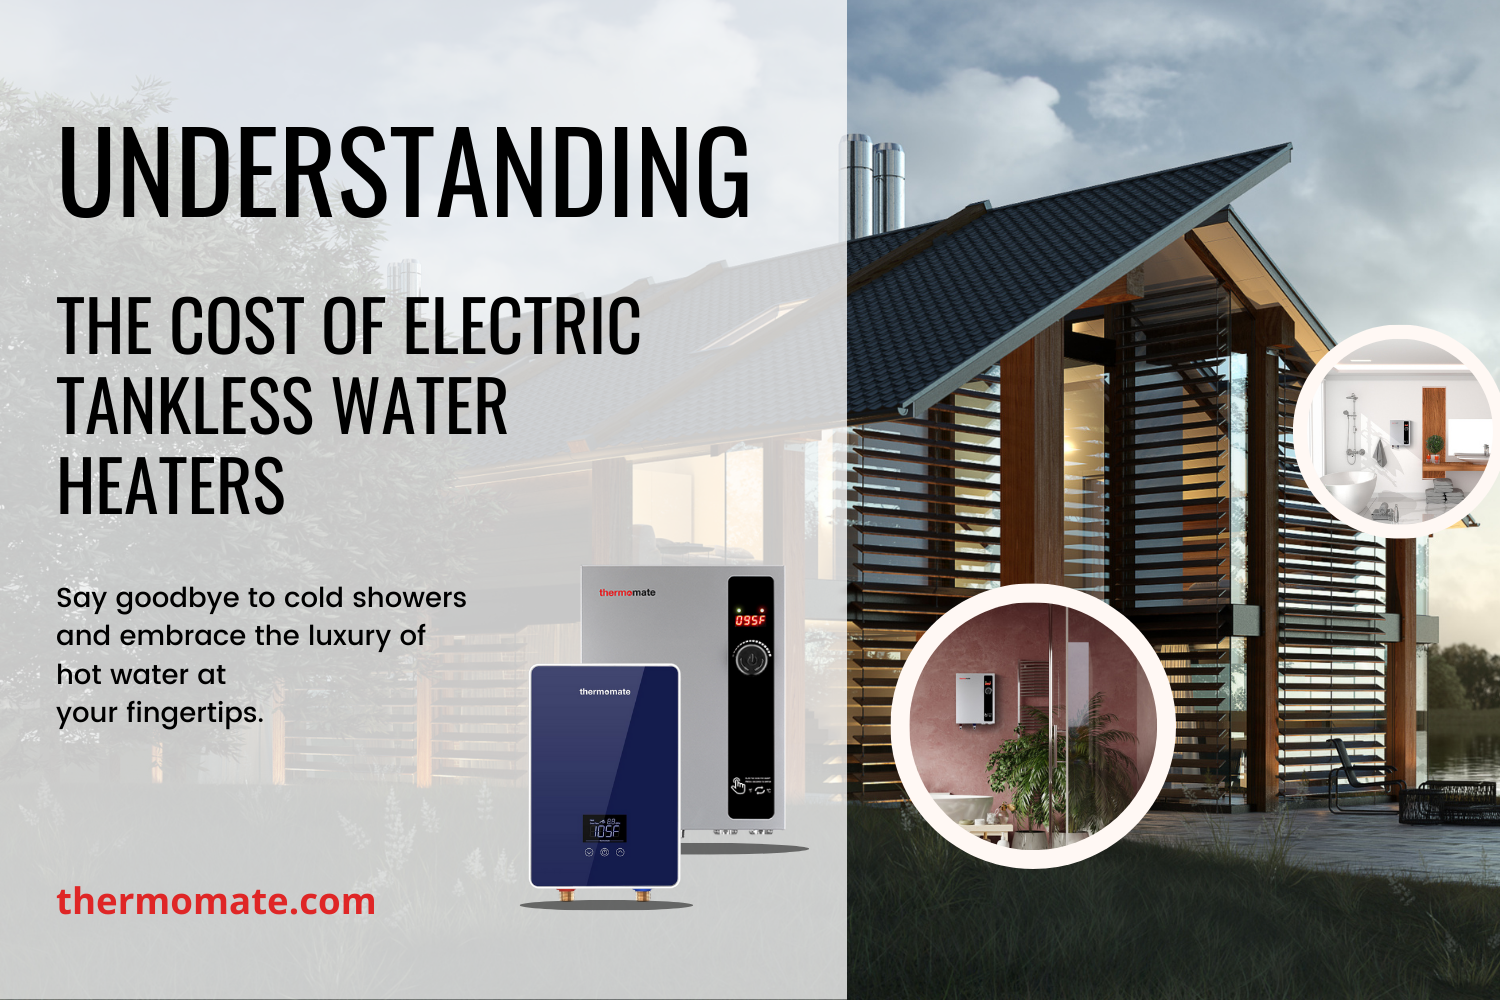 The Cost of Electric Tankless Water Heaters: What You Need to Know | Thermomate